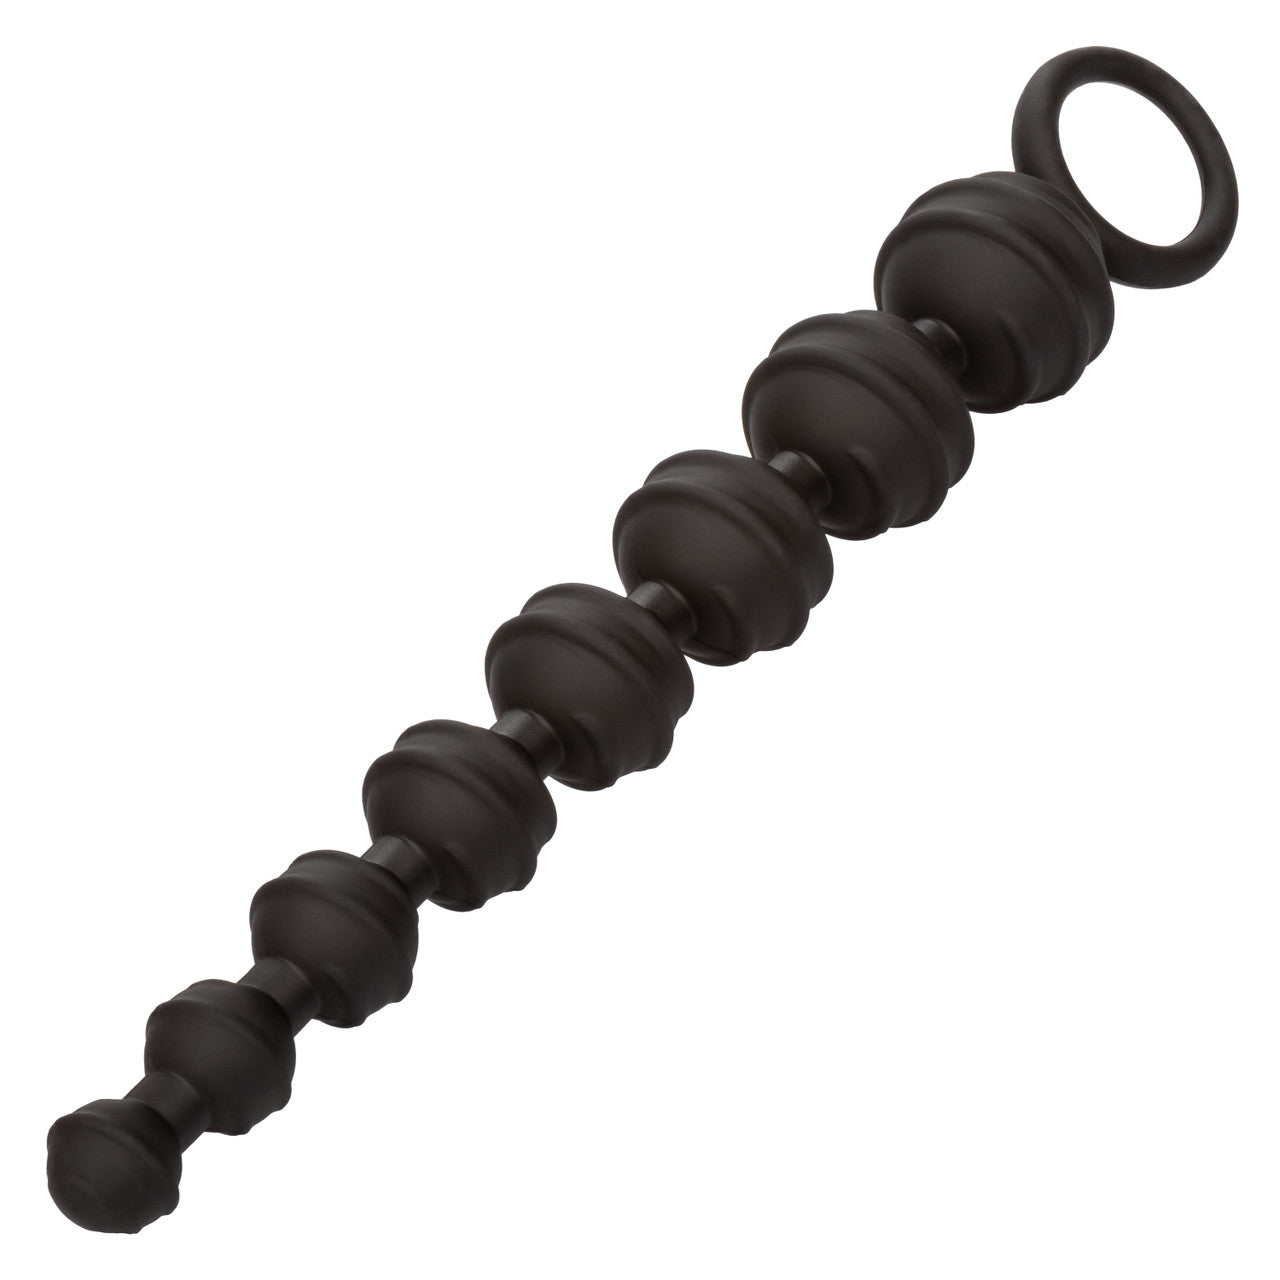 Colt Power Drill Balls - Black - Thorn & Feather Sex Toy Canada